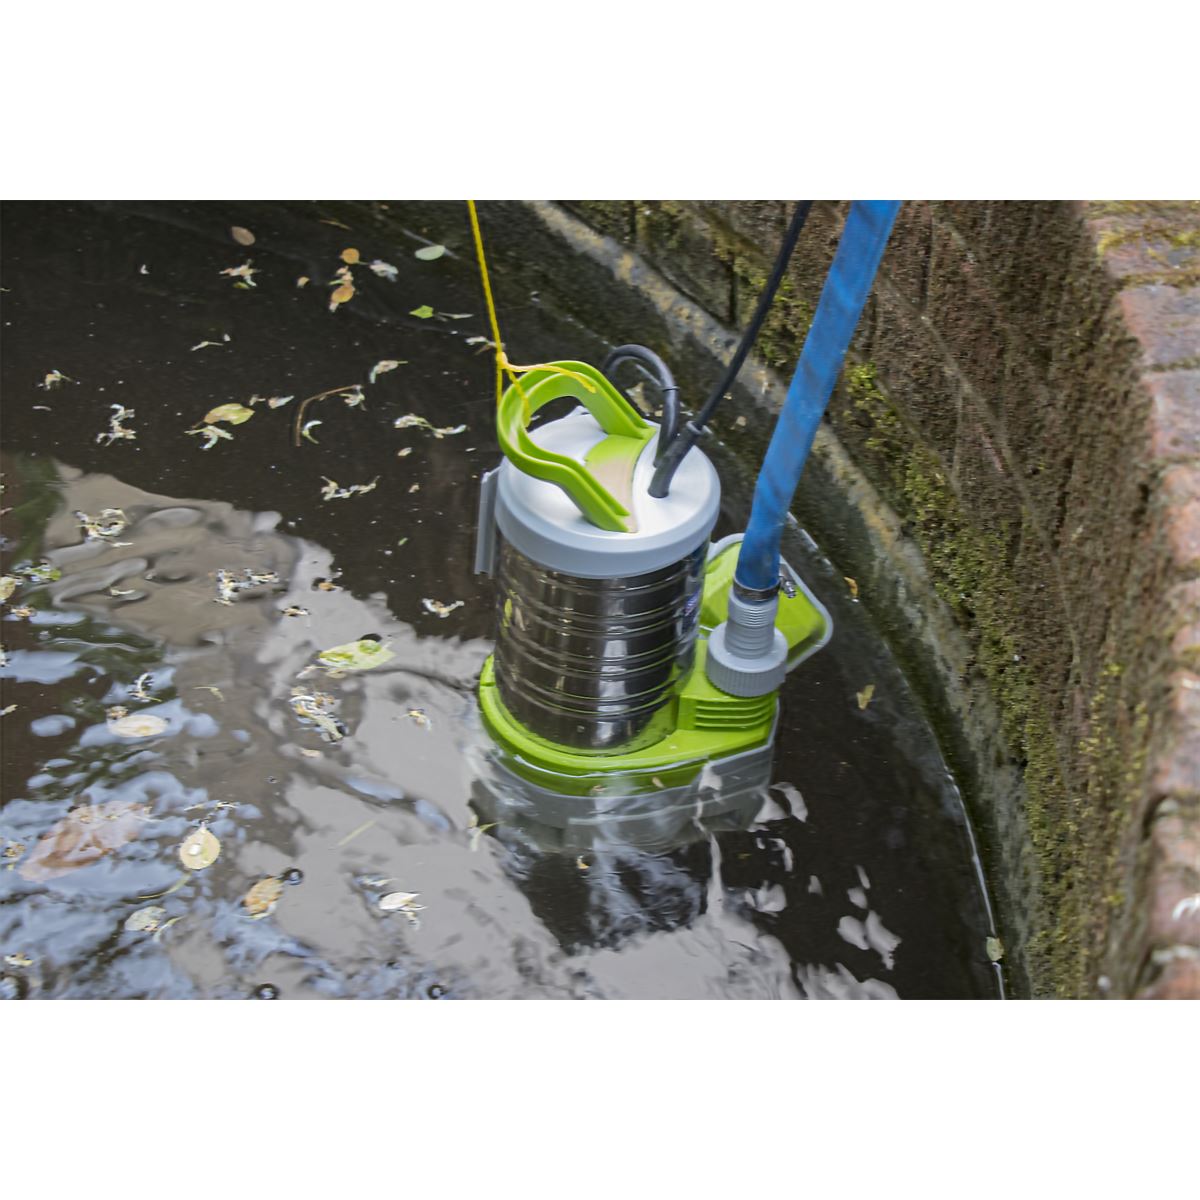 Sealey Submersible Stainless Water Pump Automatic Dirty Water 225L/min 230V